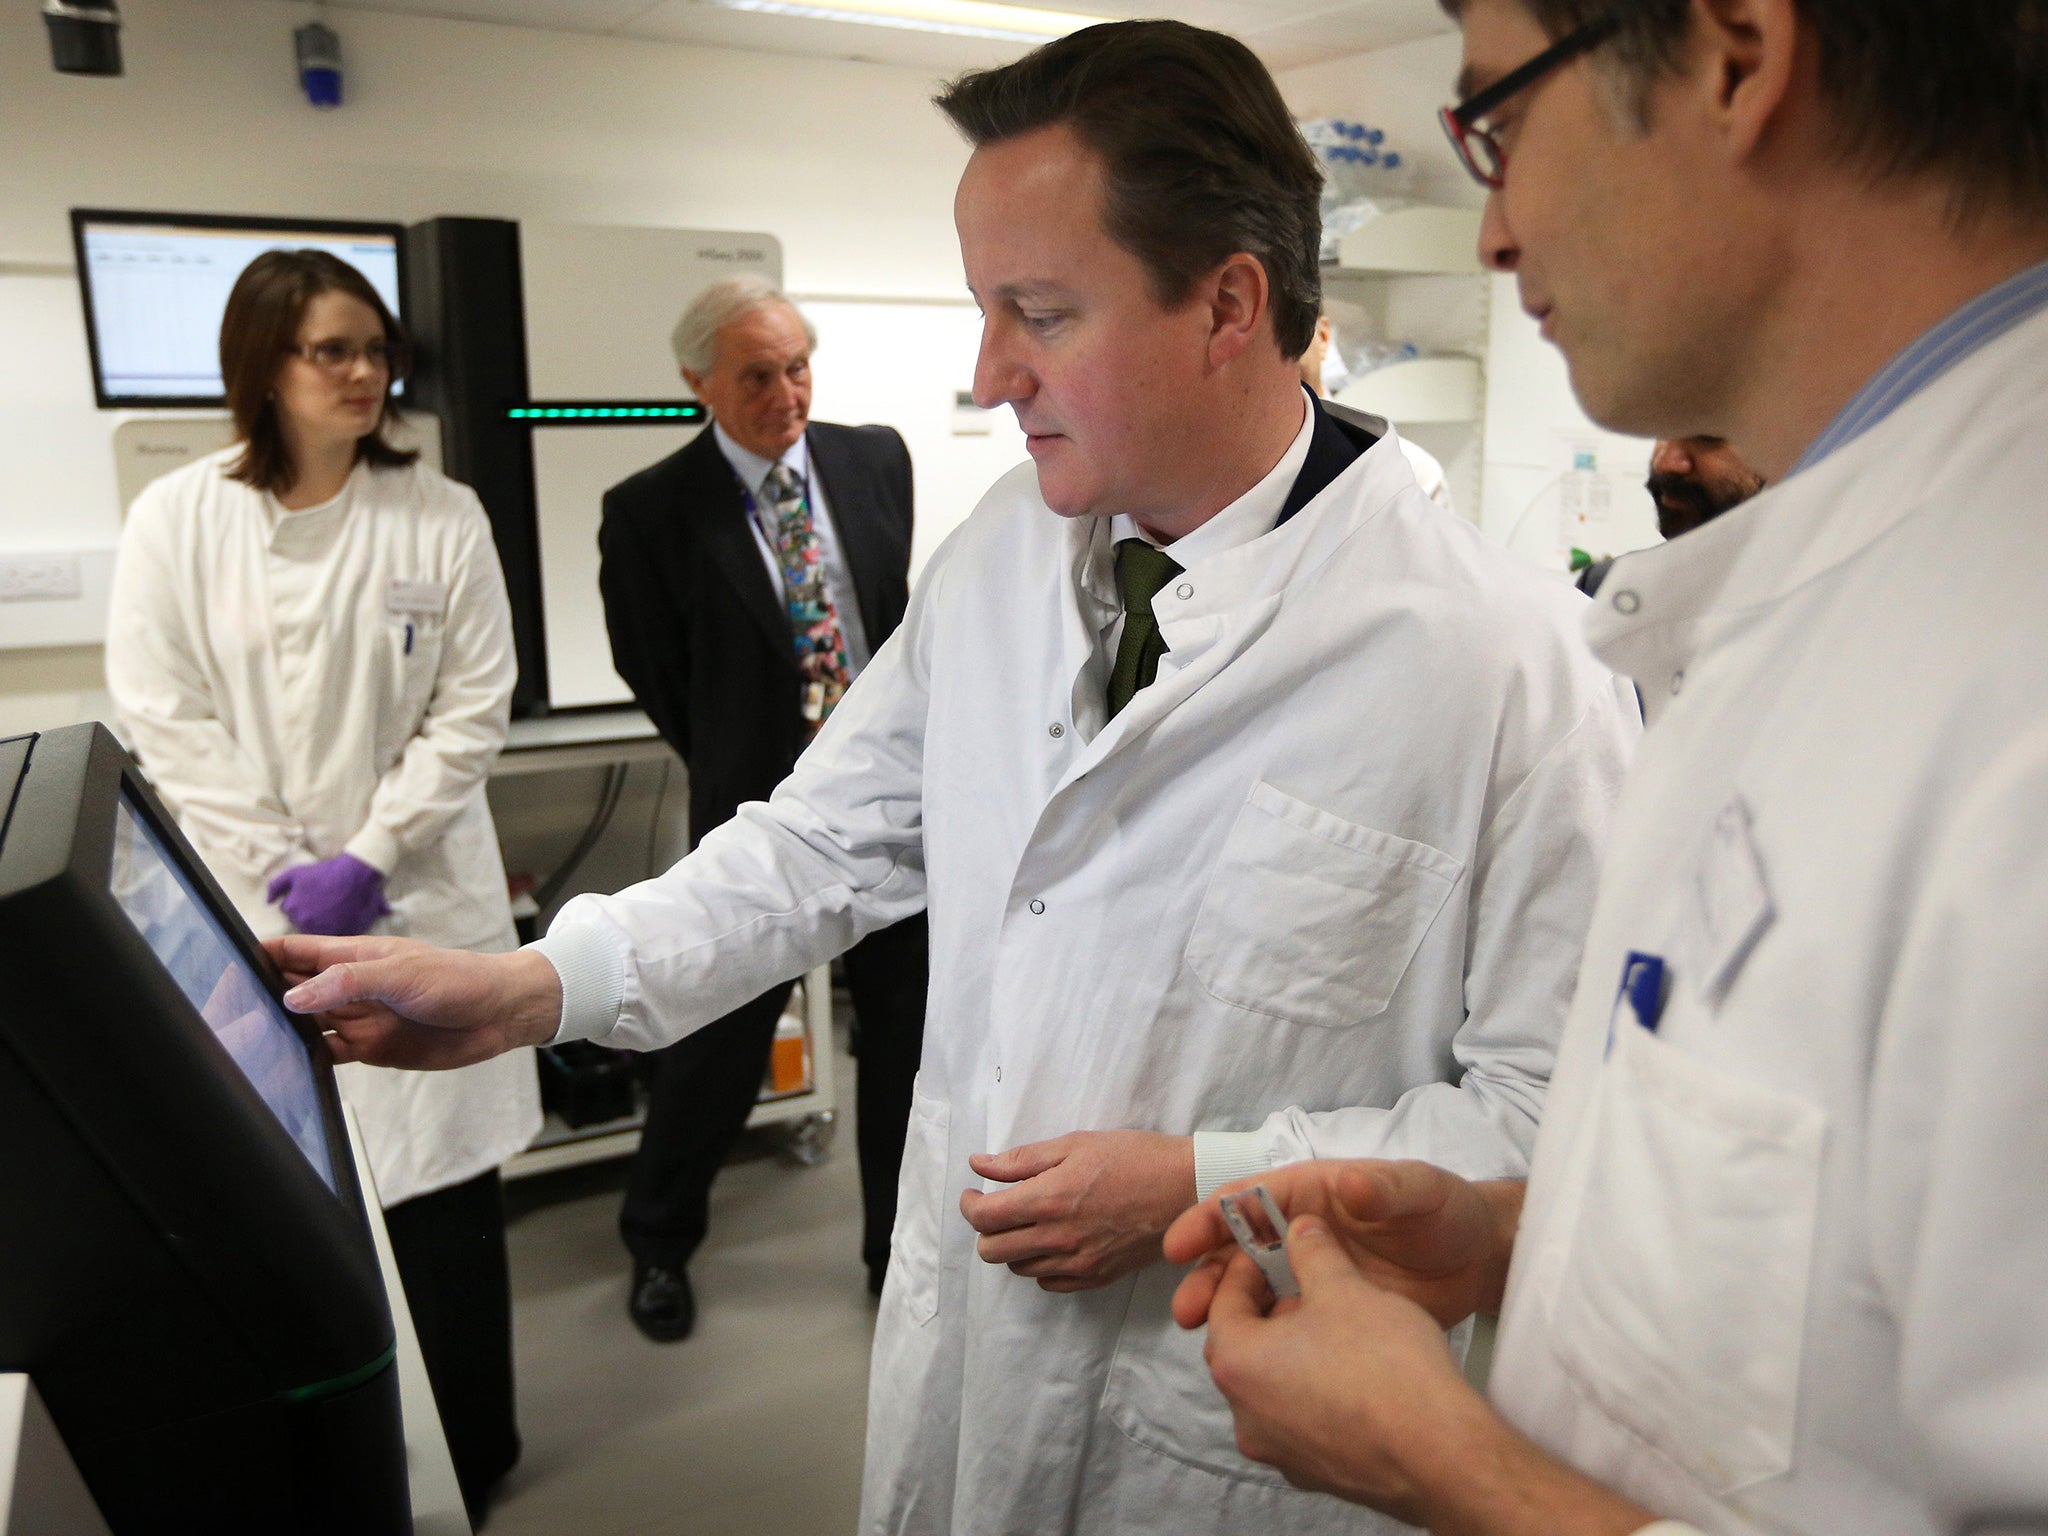 David Cameron visiting the Cancer Research UK Cambridge Institute in 2012